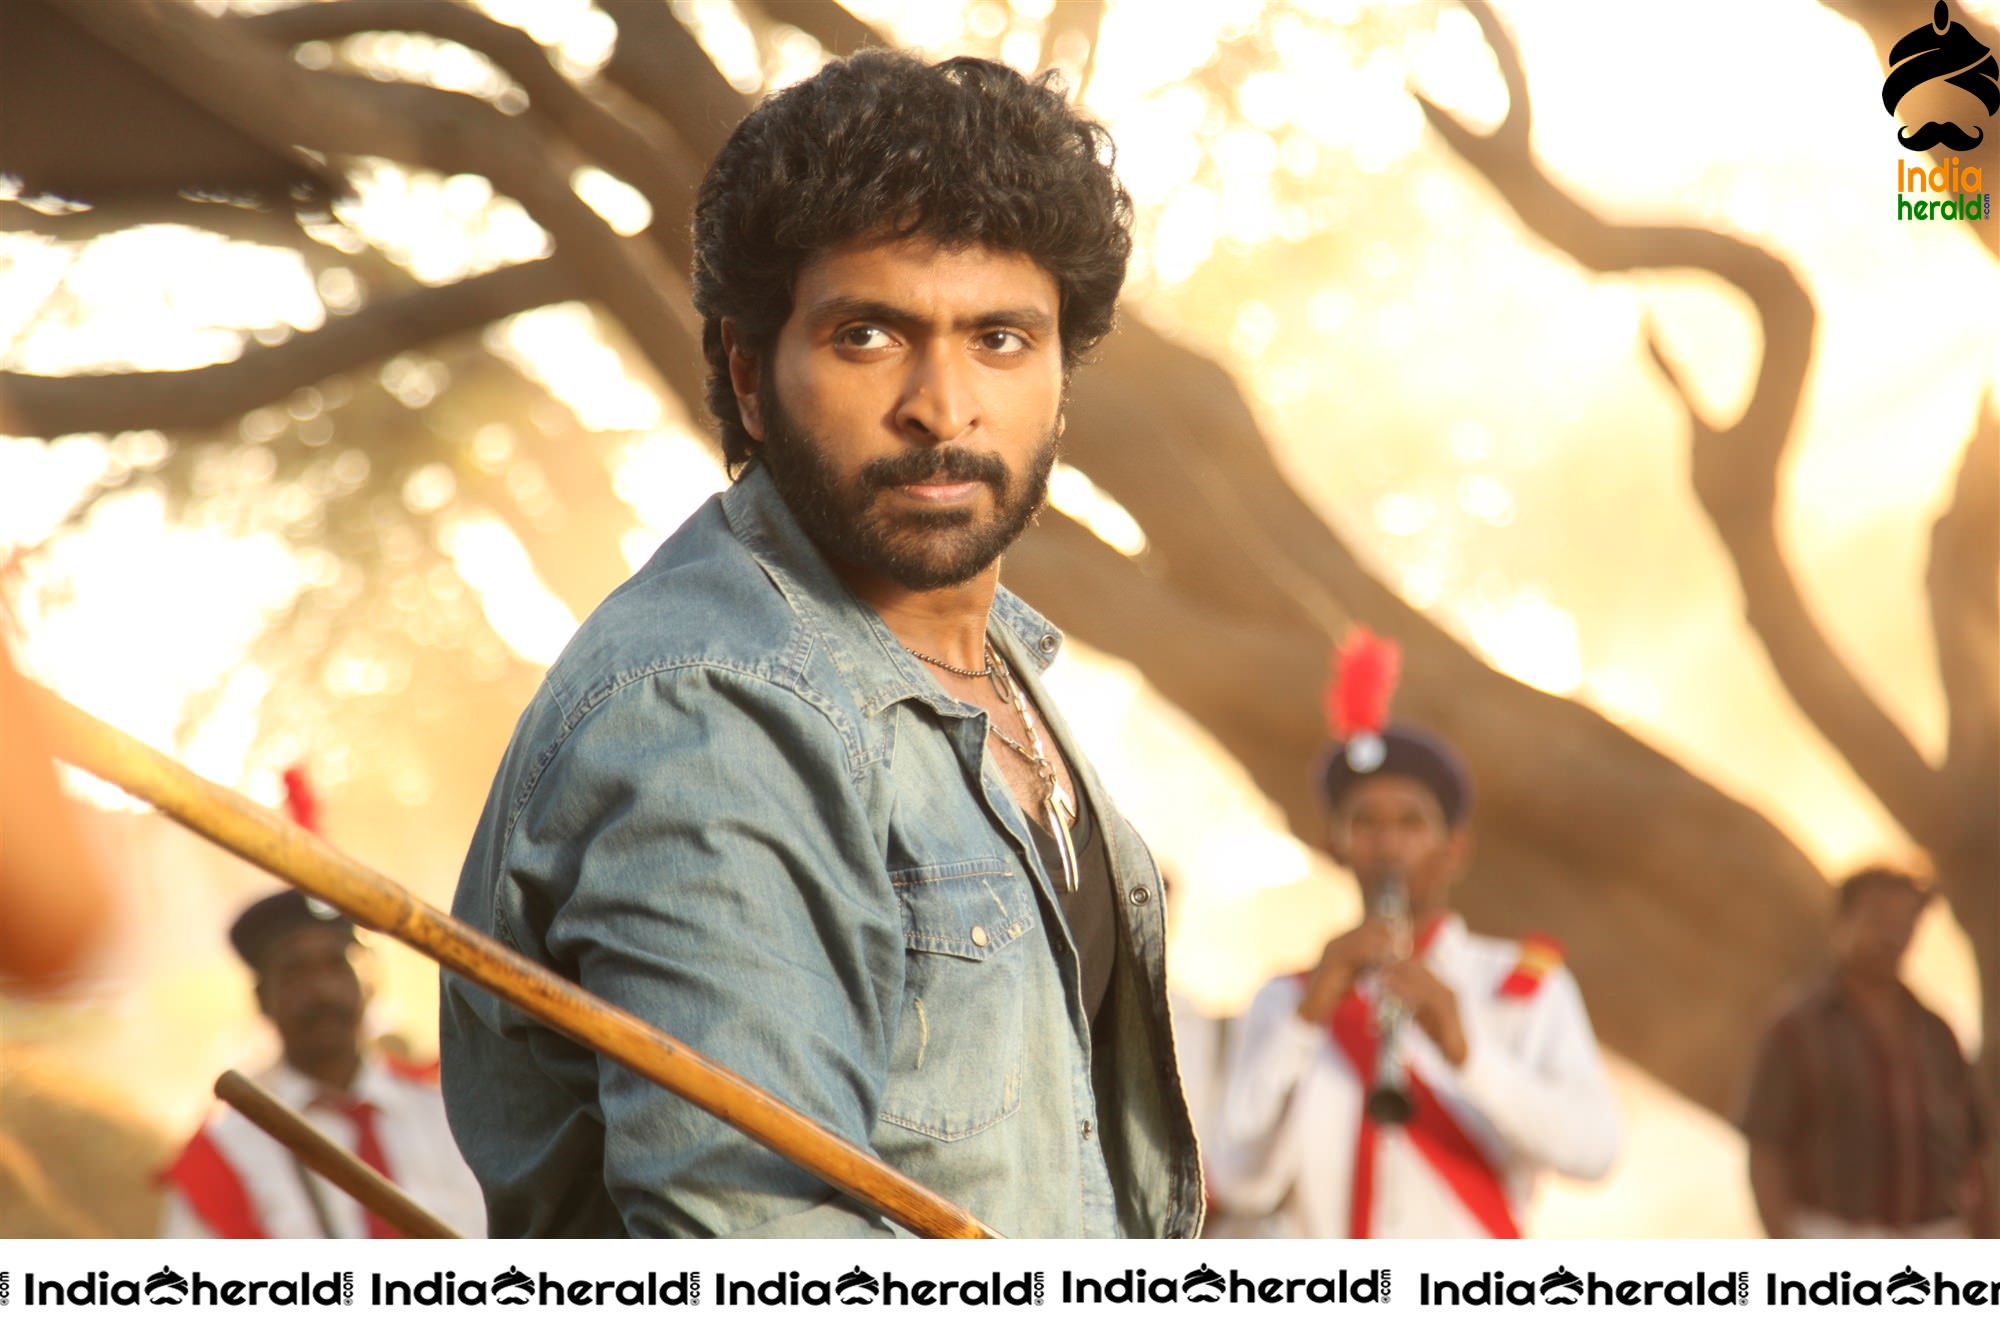 Actor Vikram Prabhu Latest Photos from his recent release Set 2